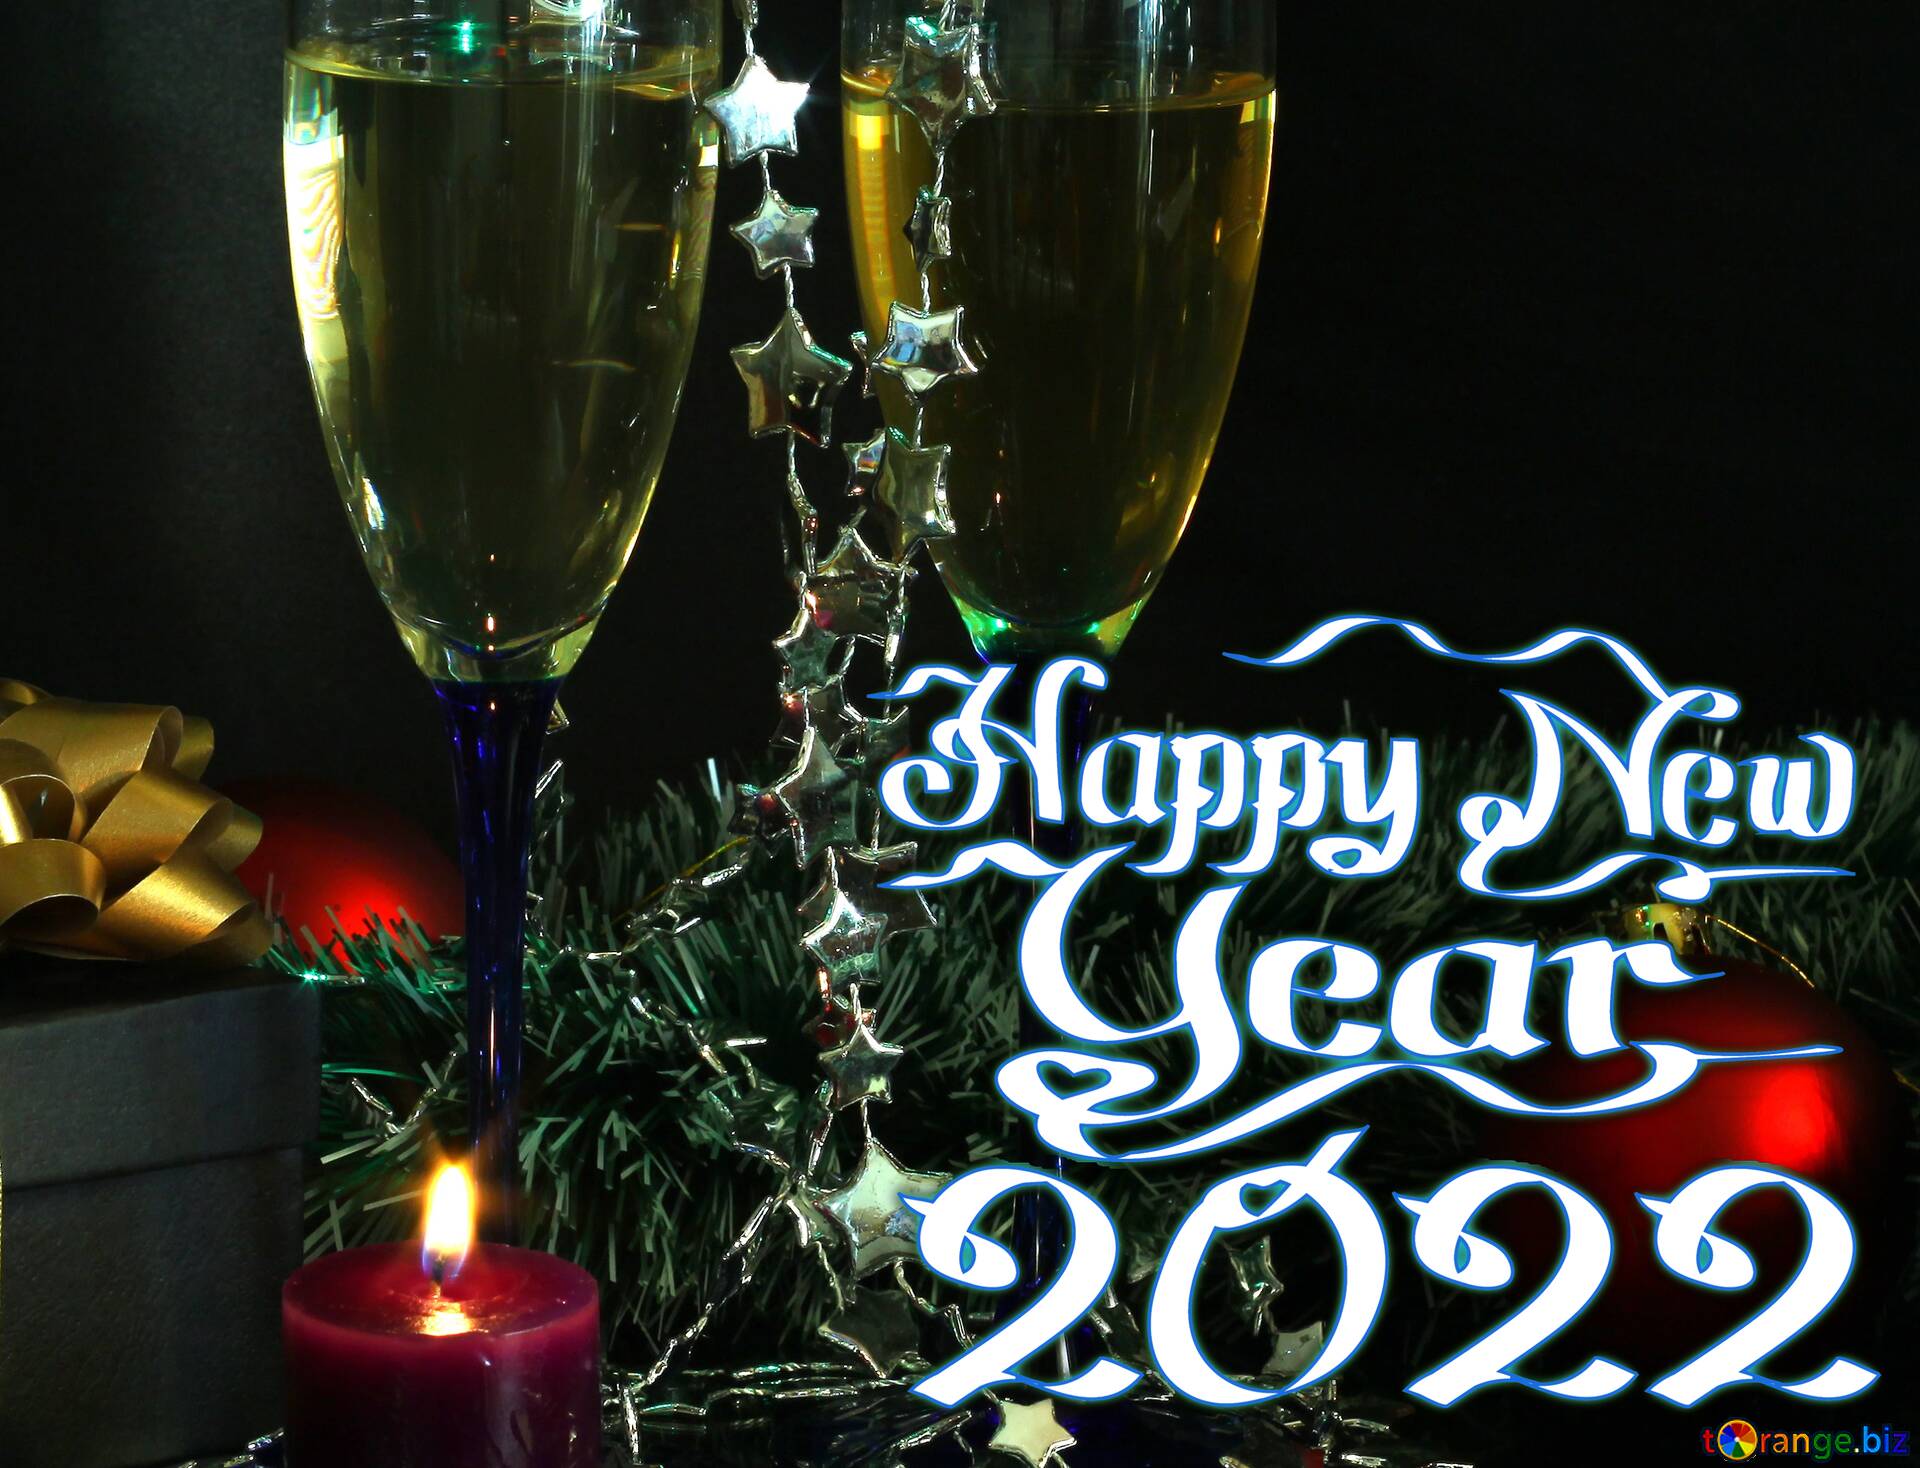 Download free picture Happy New Year card with wine on CC-BY License ~ Free  Image Stock tOrange.biz ~ fx №77904